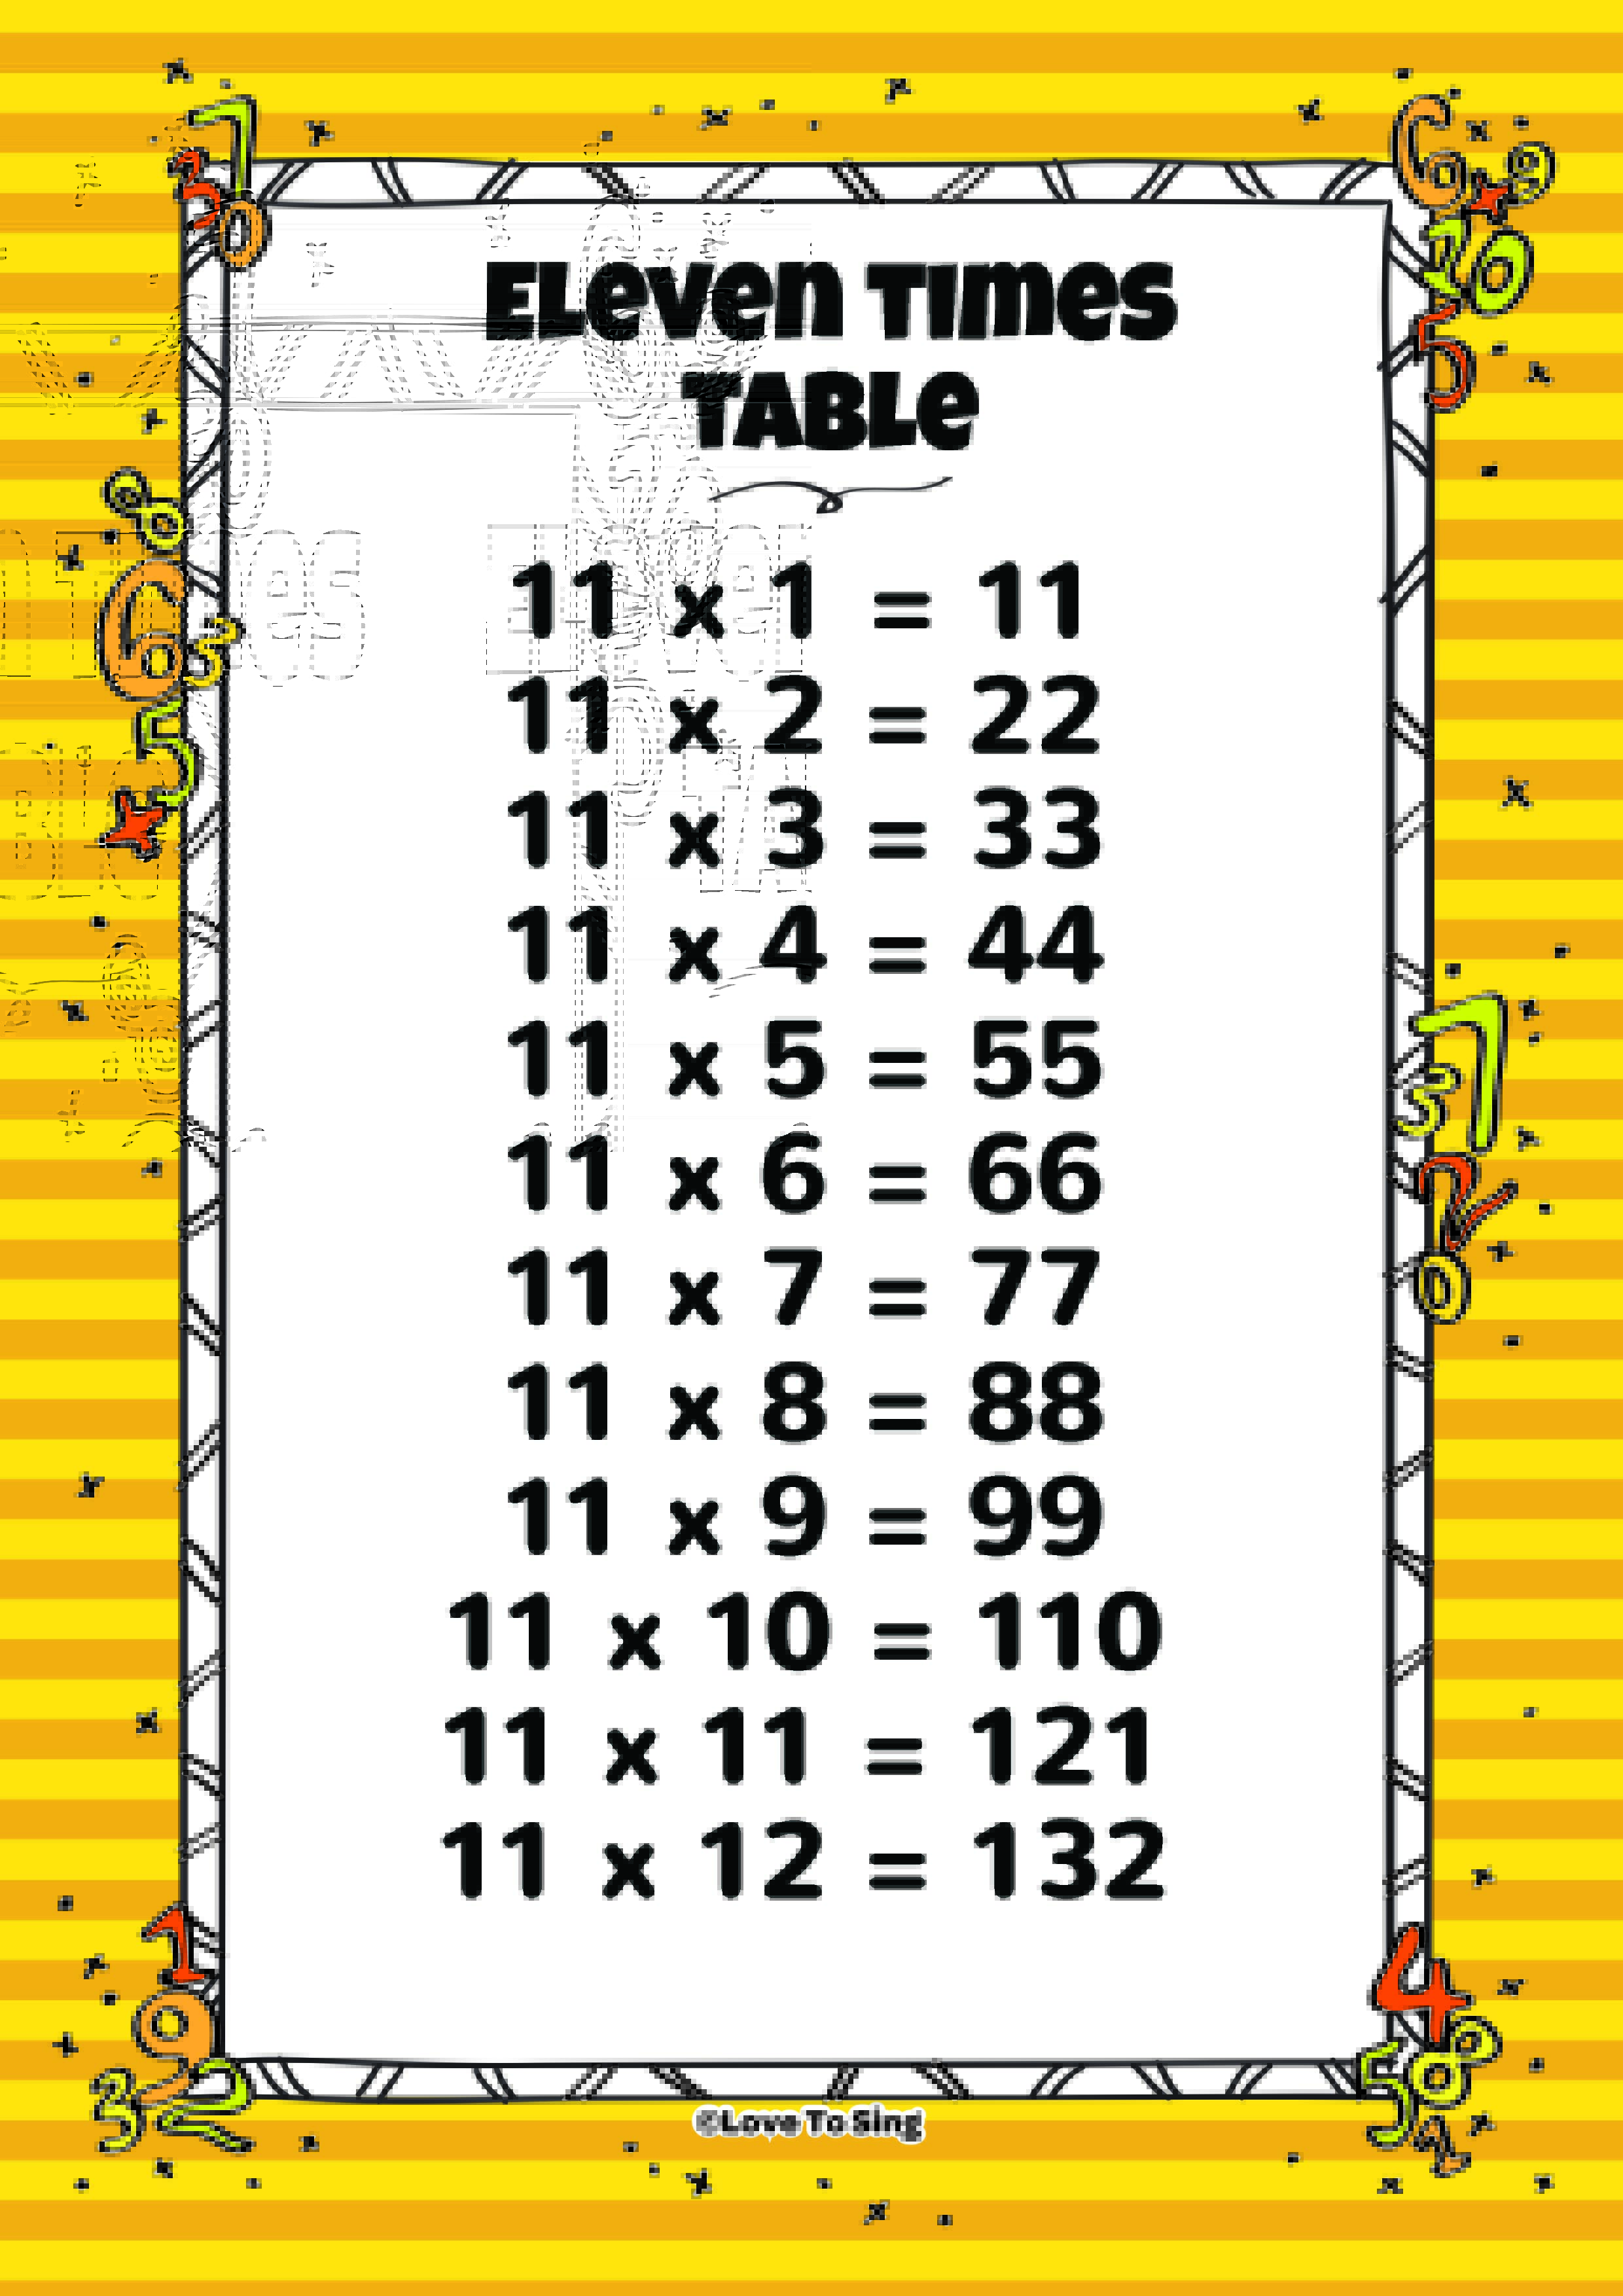 eleven-times-table-and-random-test-kids-video-song-with-free-lyrics-activities